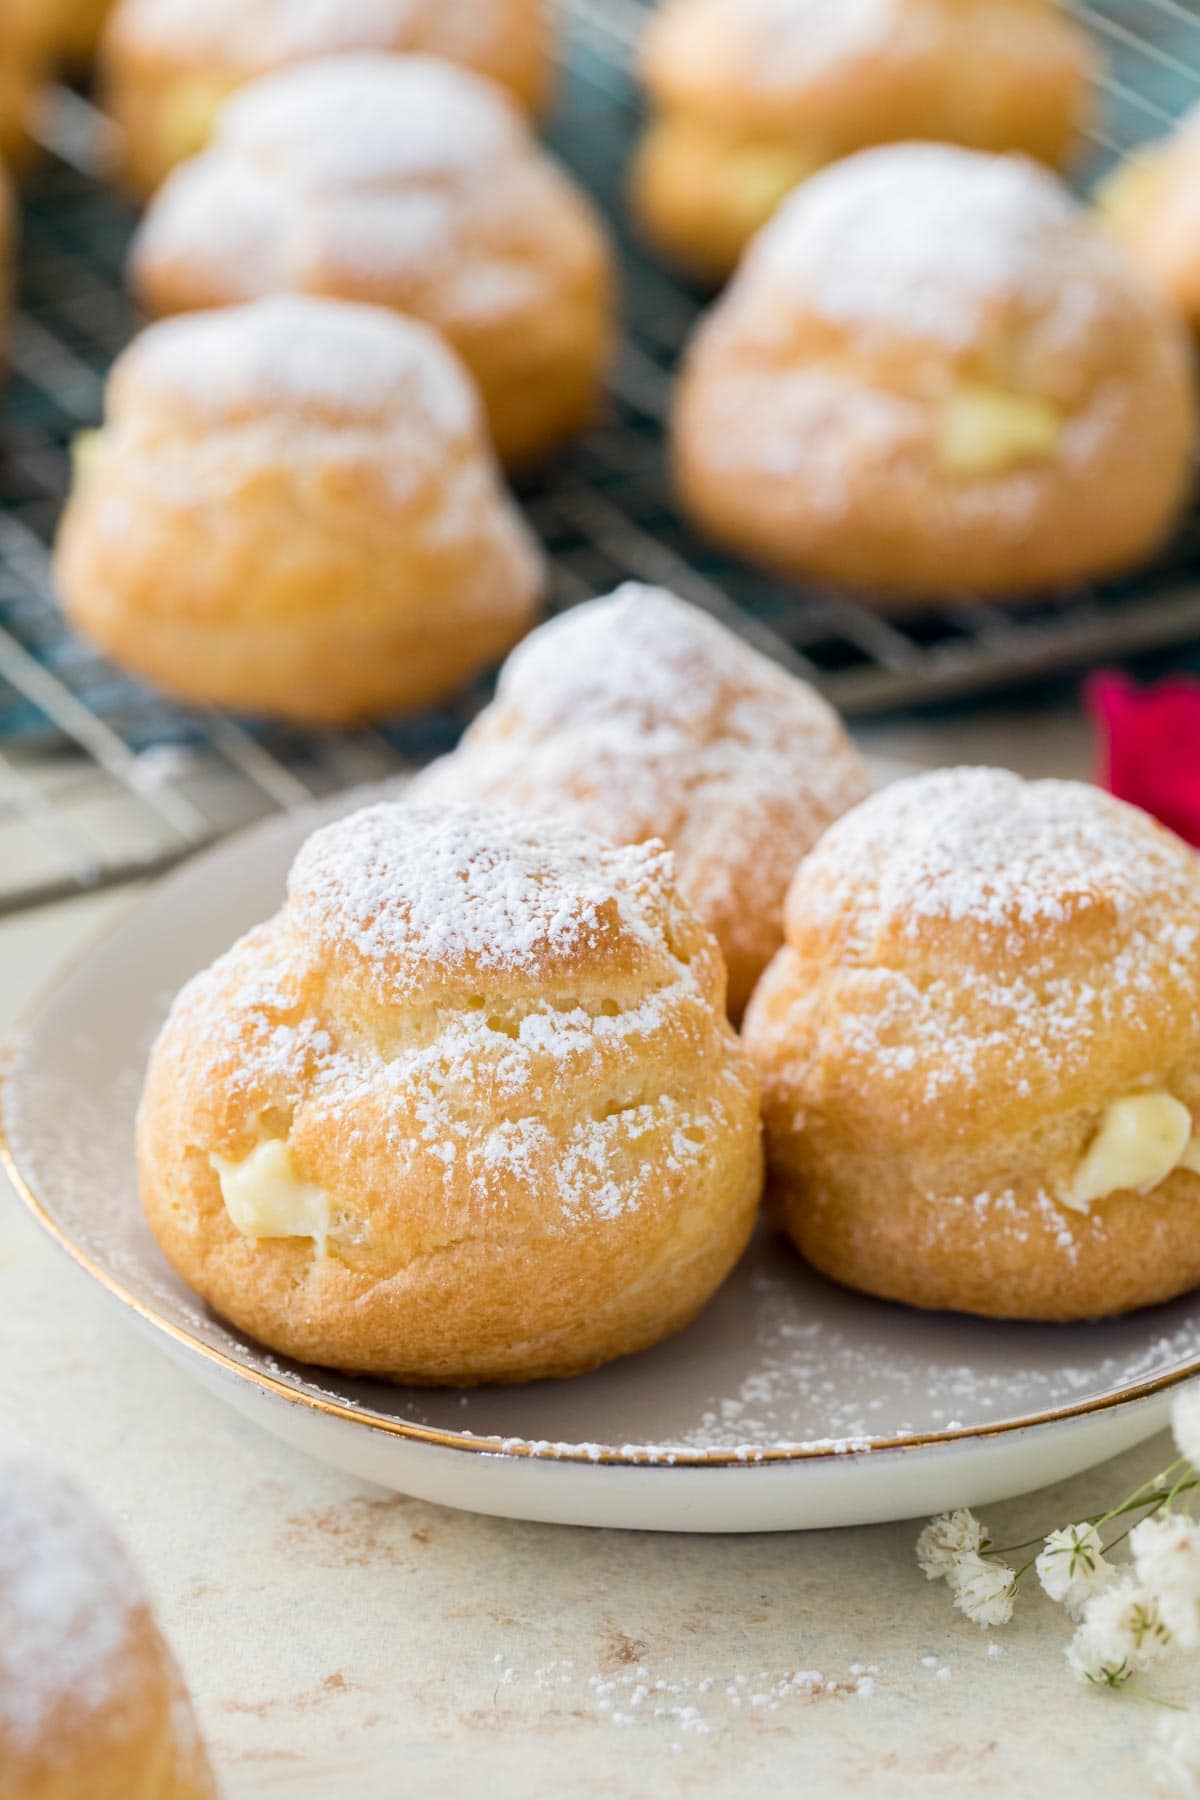 Plate of three custard-filled cream puffs dusted with powdered sugar.